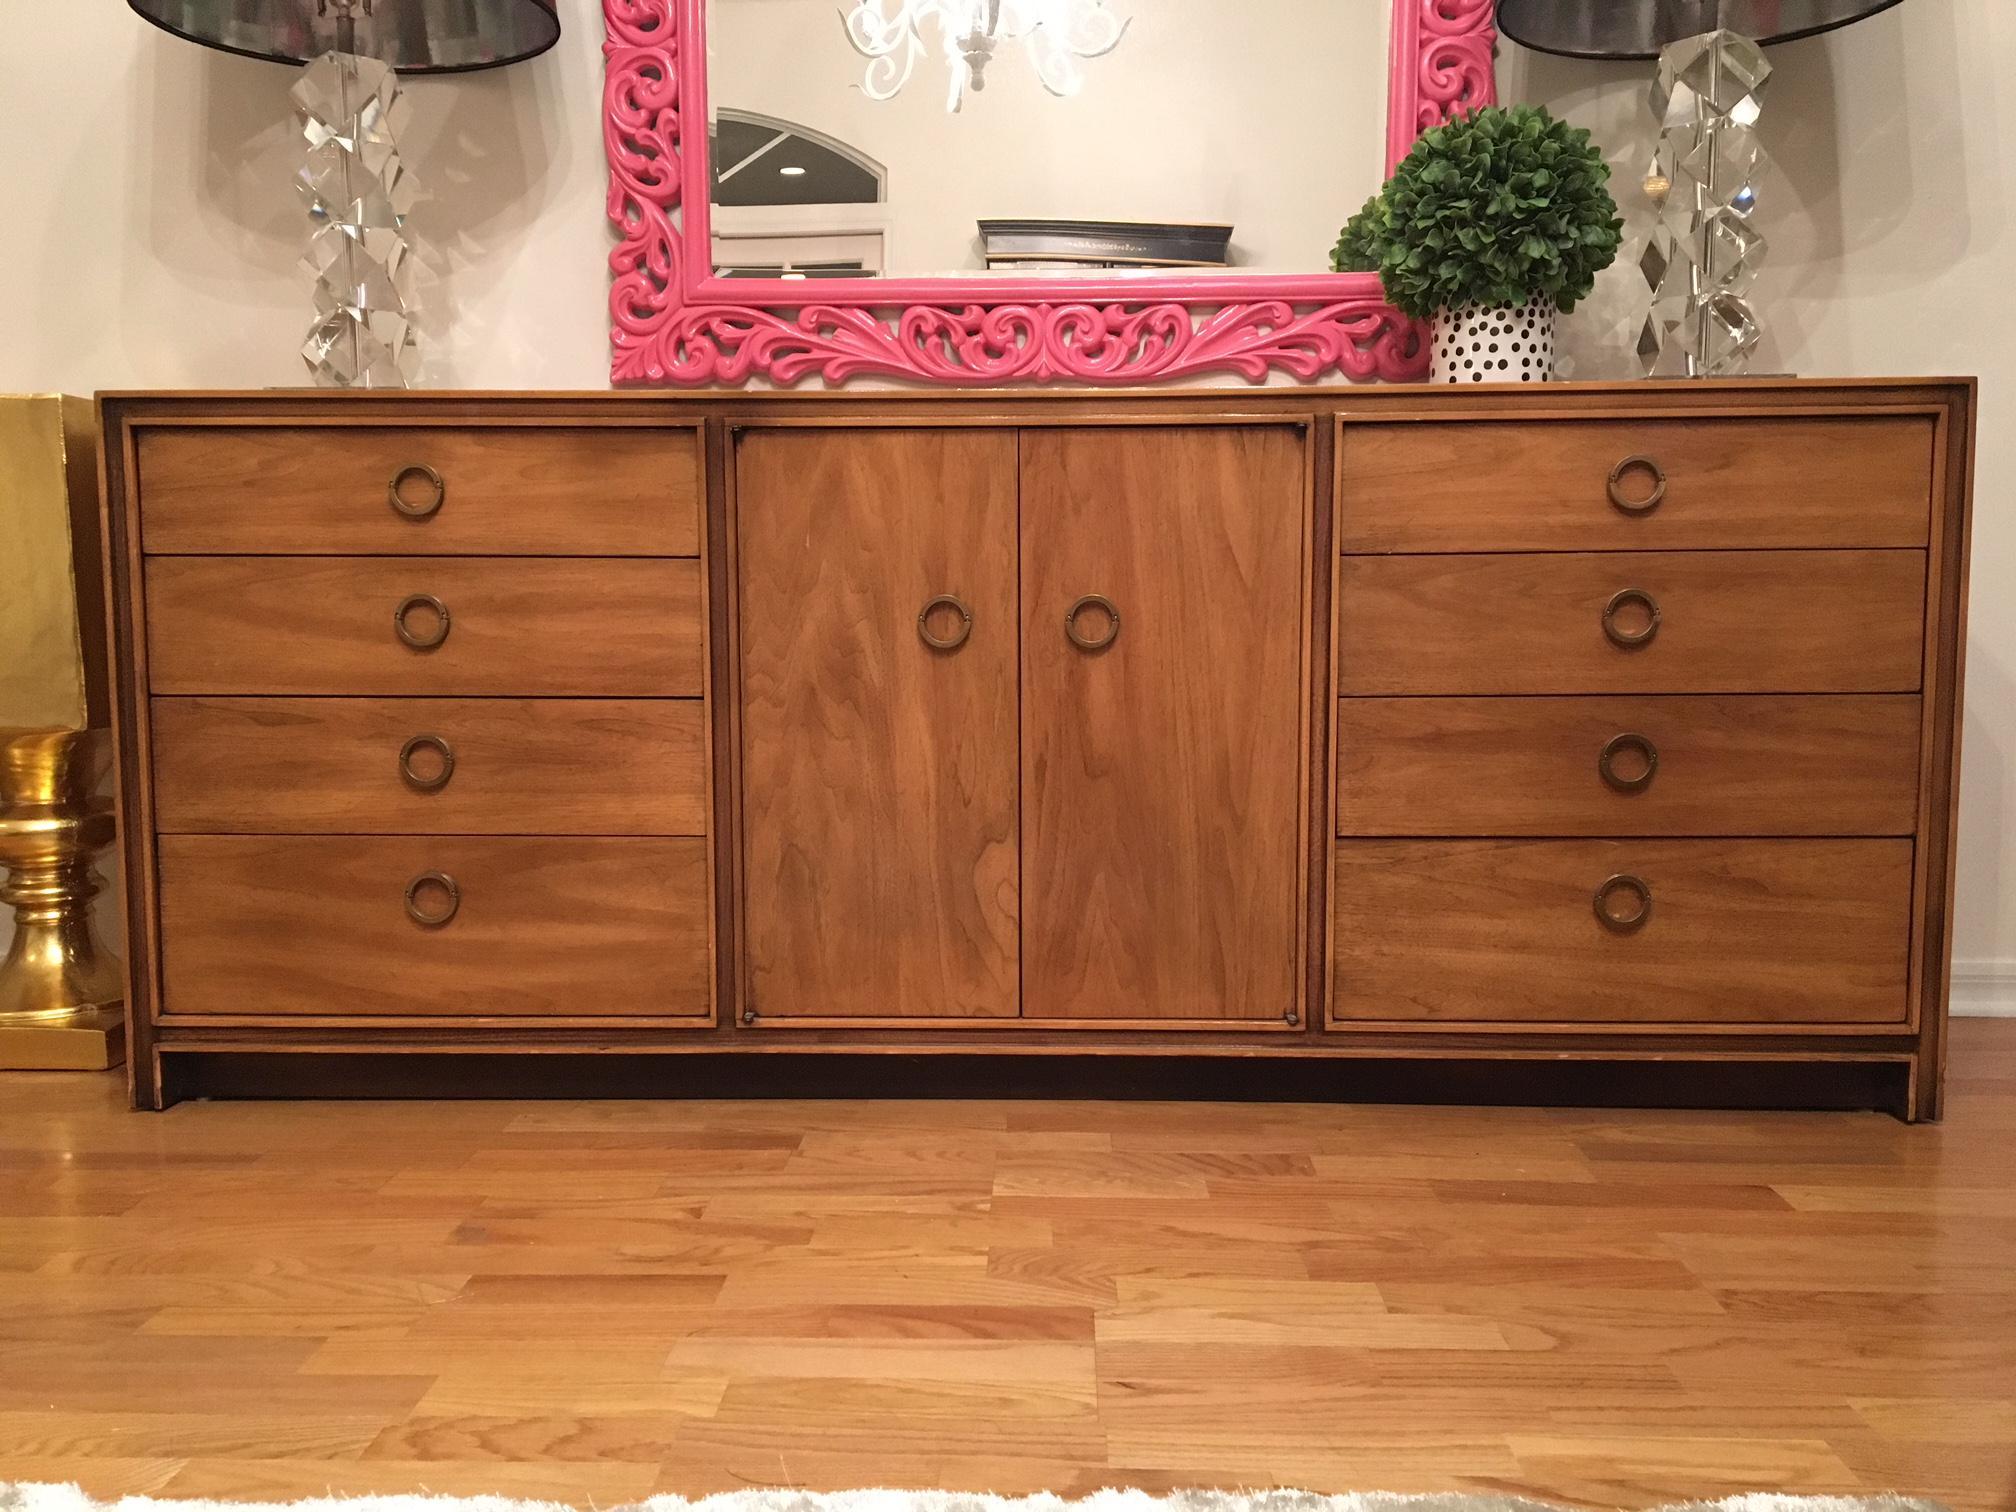 This midcentury eleven-drawer dresser by Hickory Furniture features double doors and unique brass ring hardware. Bottom half of rings are hinged to swing out as you pull. Very good vintage condition with minor signs of age appropriate wear. Some